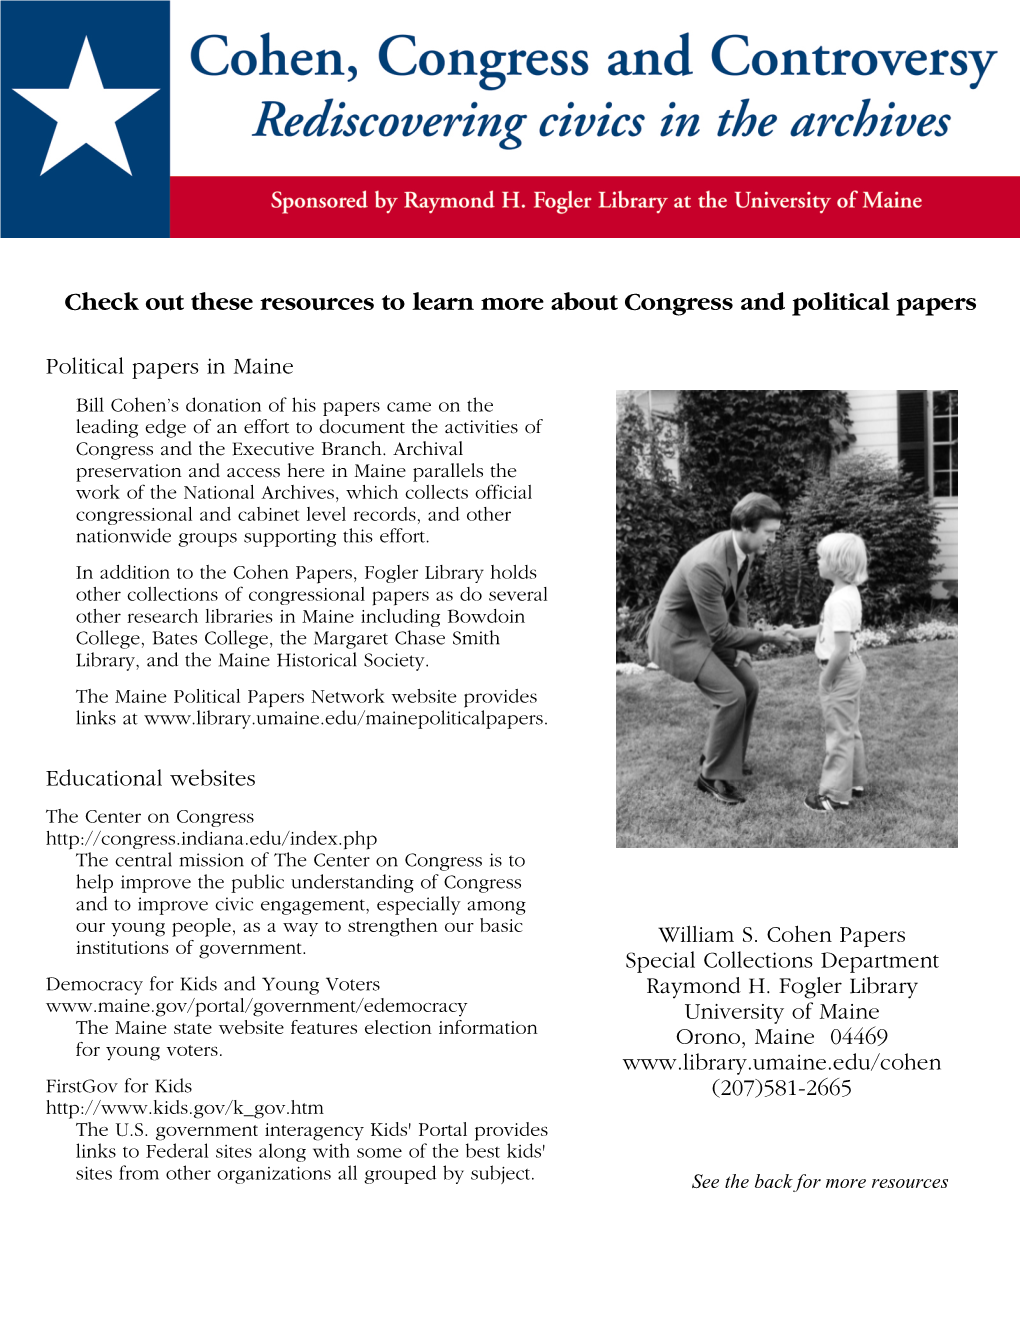 Check out These Resources to Learn More About Congress and Political Papers